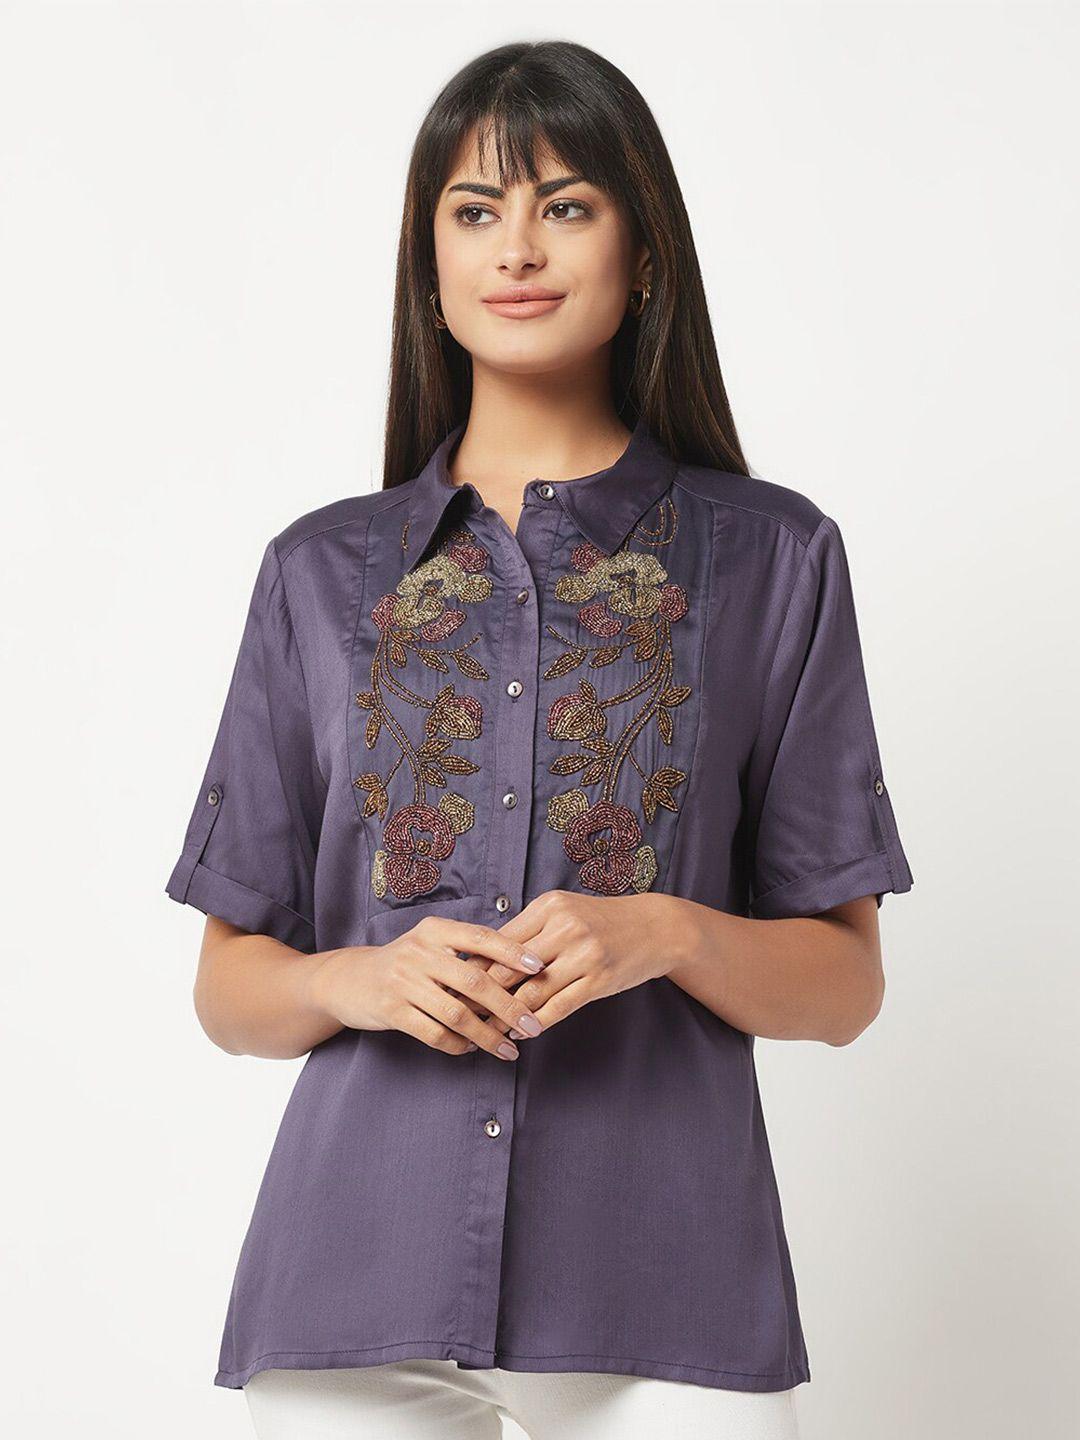 house-of-s-floral-printed-embellished-casual-shirt